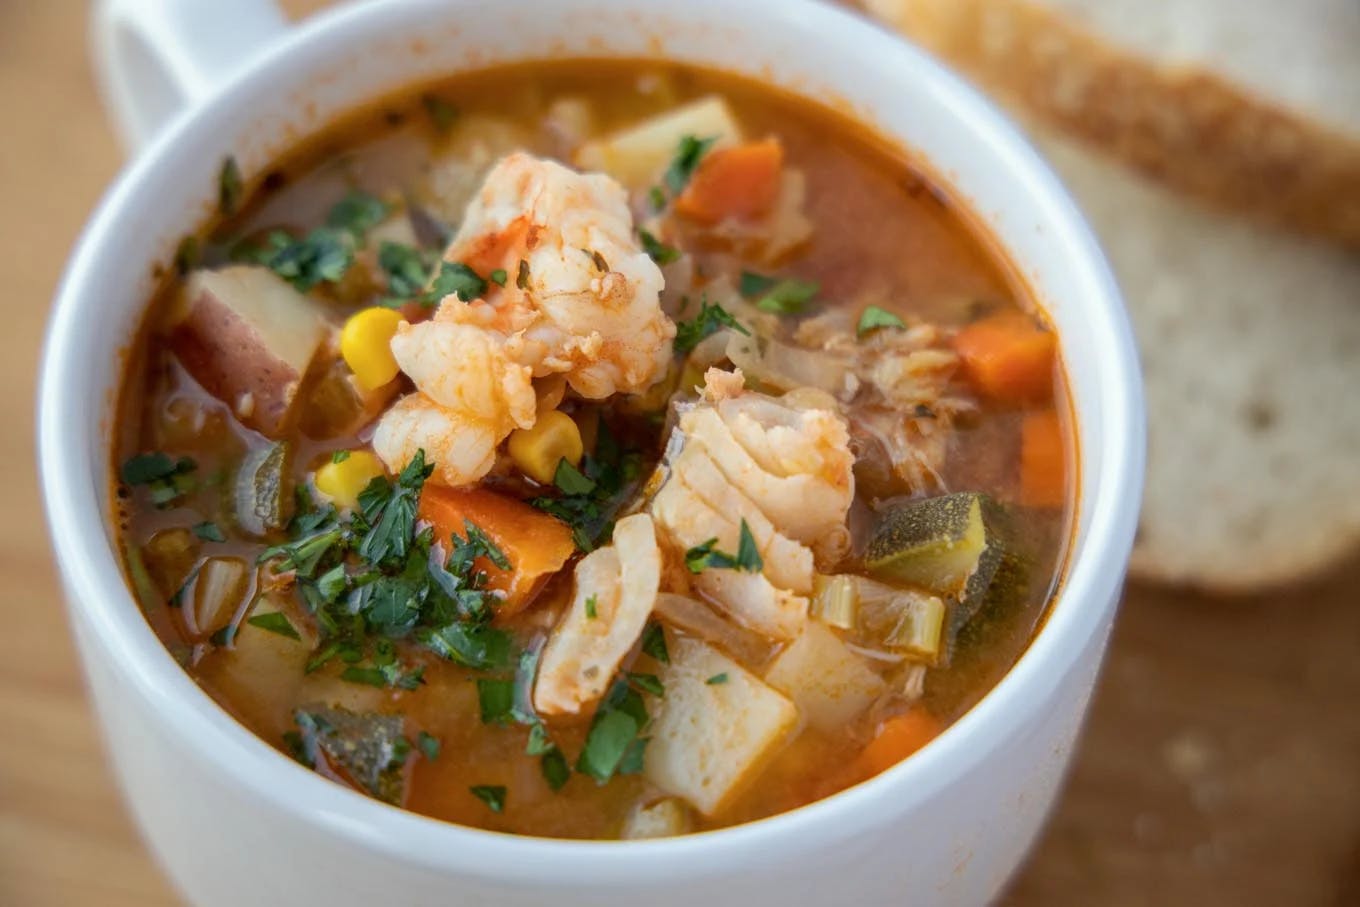 Recipes For Seafood In Soup